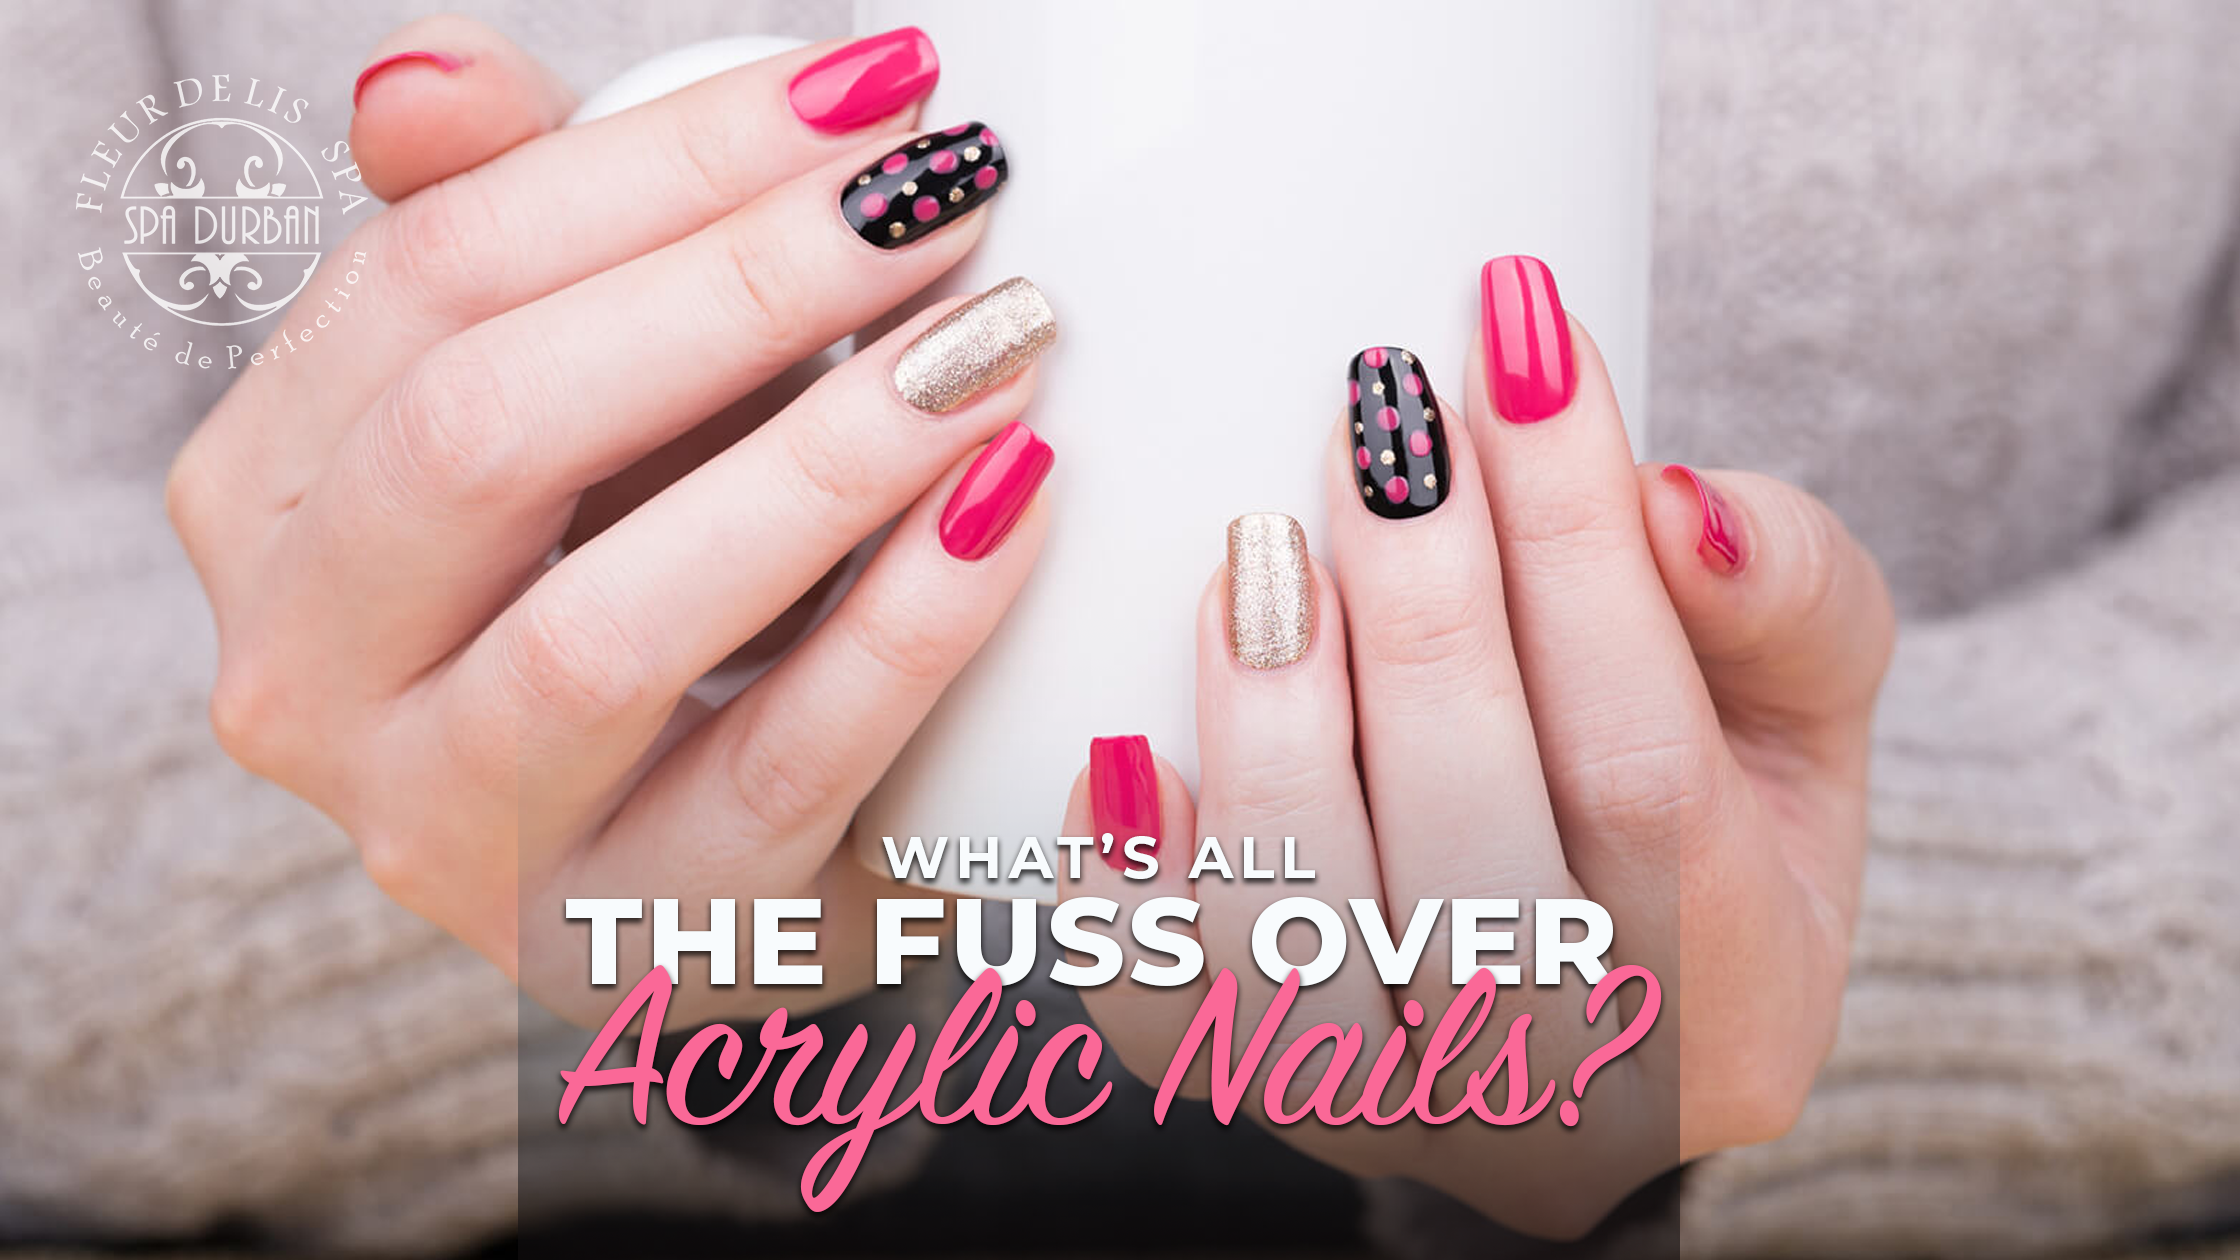 What’s All the Fuss Over Acrylic Nails?